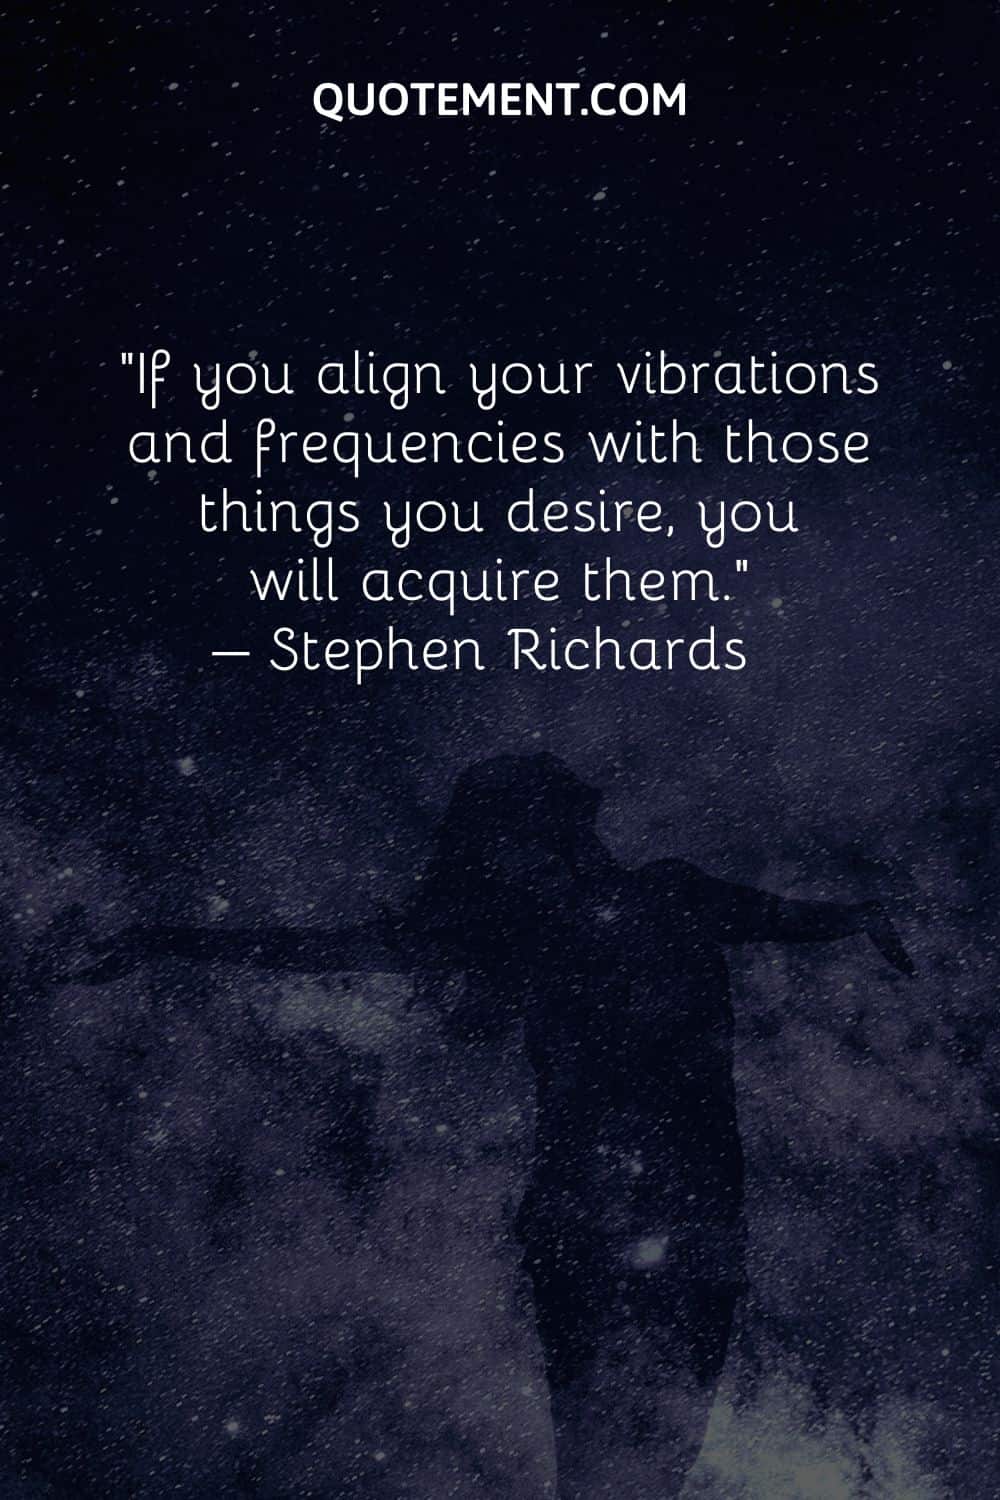 If you align your vibrations and frequencies with those things you desire, you will acquire them